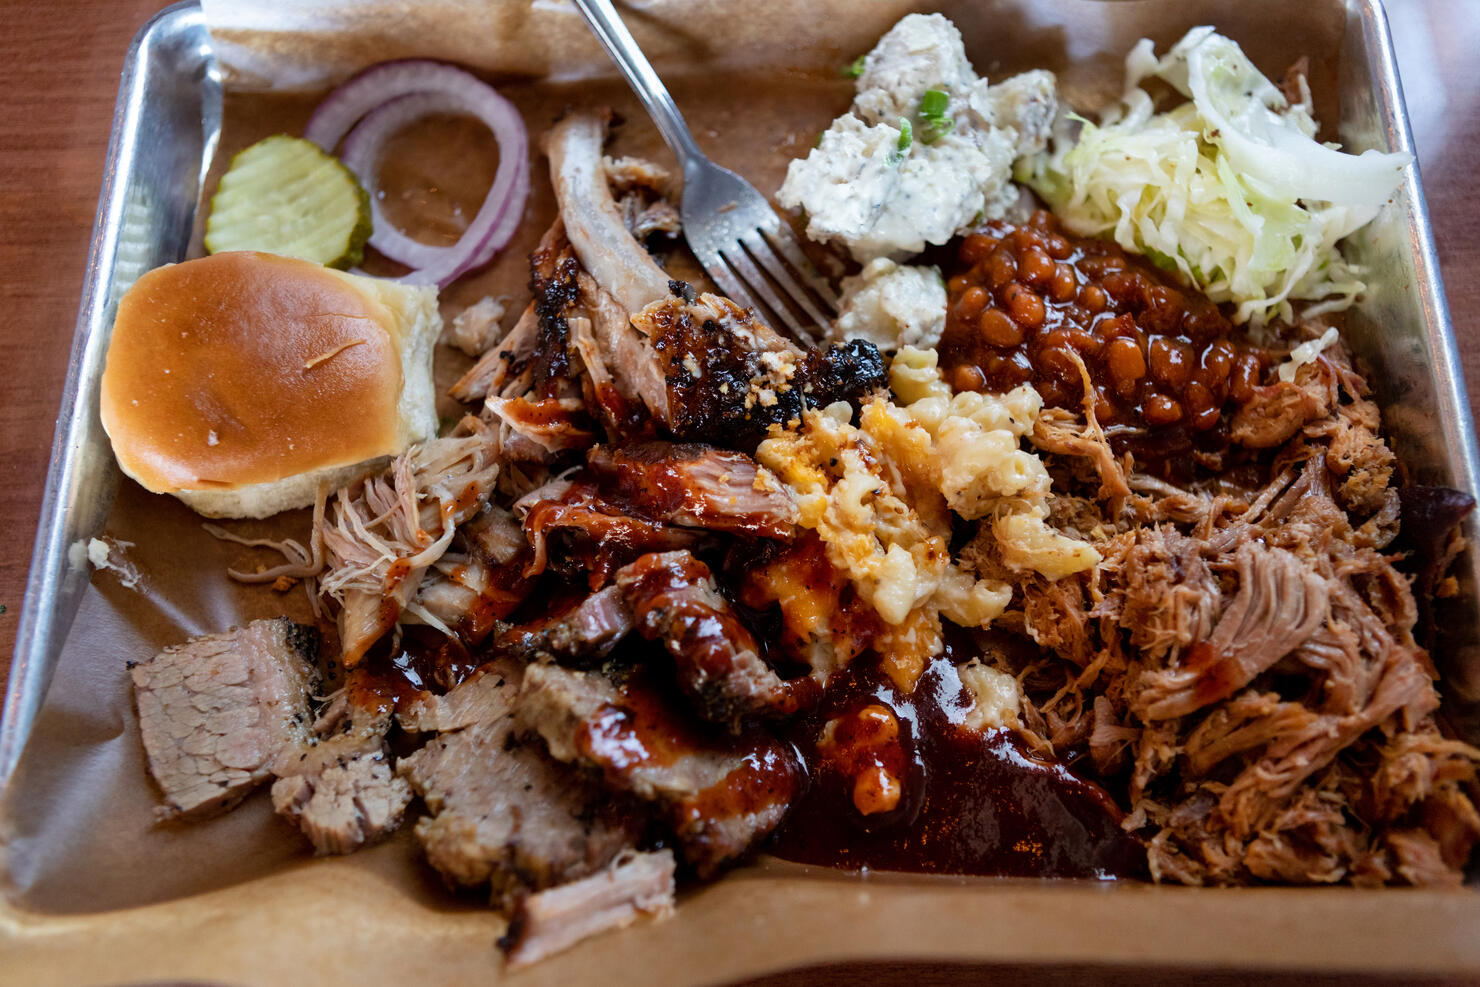 Above view of barbecue and sides on trays